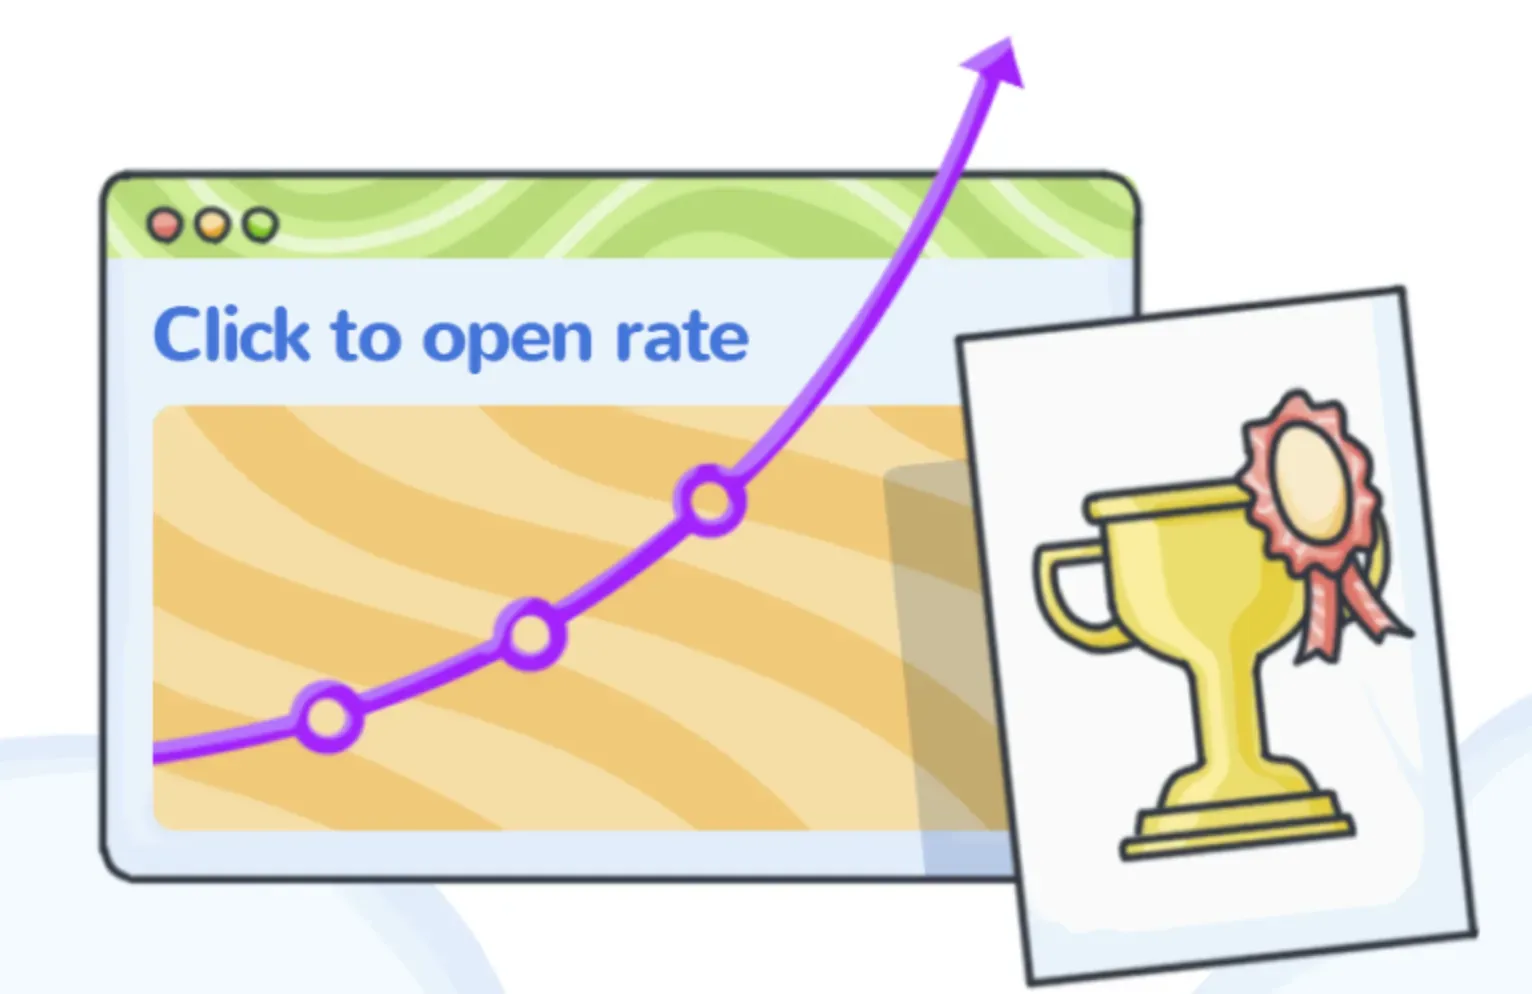 Best Practices and Tips for Boosting Click-to-Open Rate (CTOR)